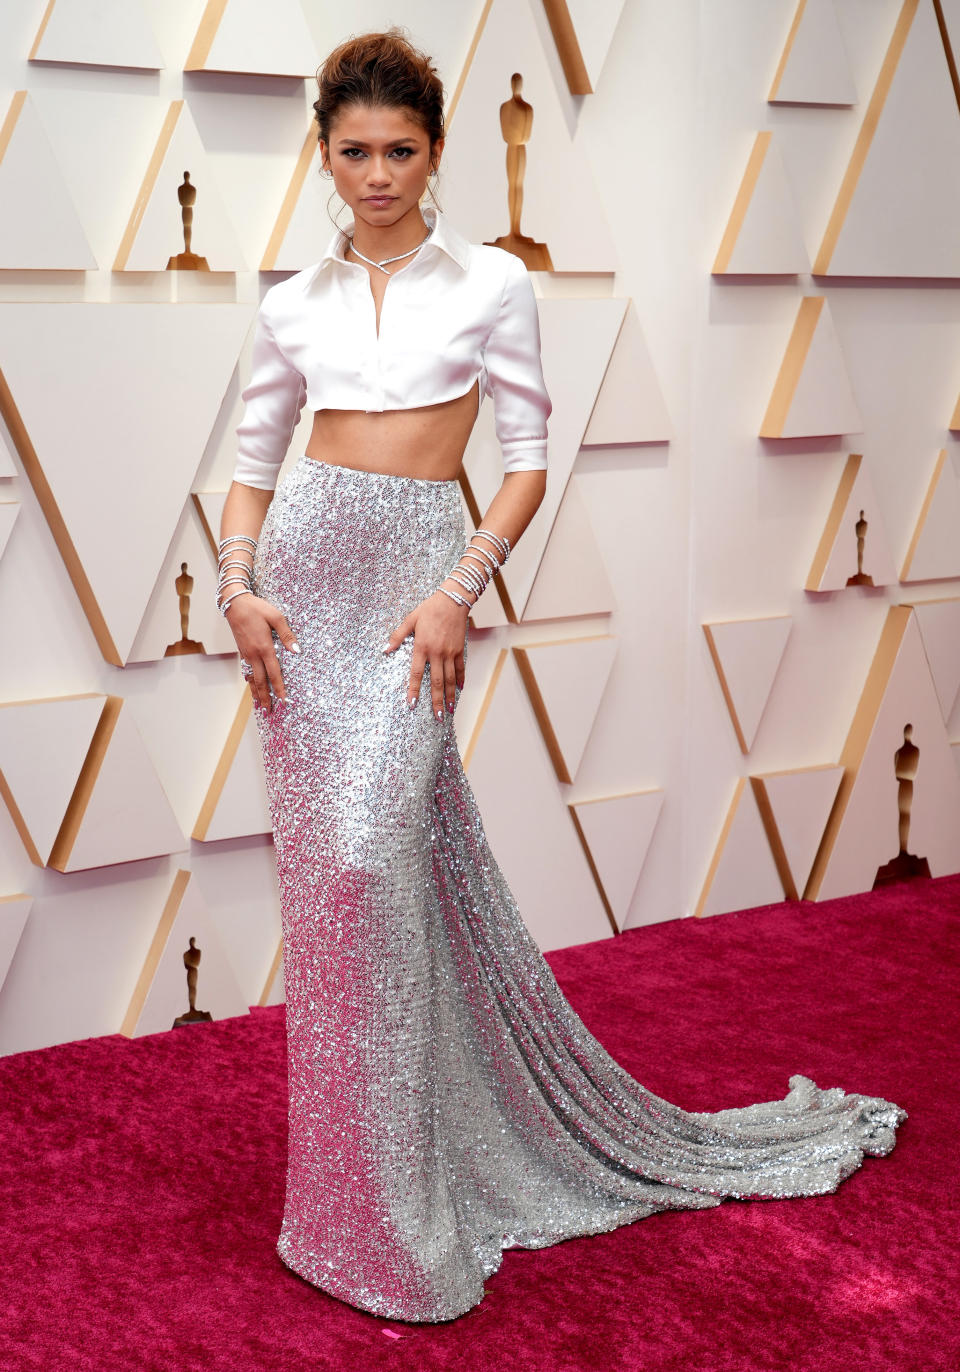 Zendaya attends the 94th Annual Academy Awards at Hollywood. She wears a cropped white blouse which exposes her tummy, with a long silver sequinned floor length skirt with a train. She wears silver bangles up her arms.